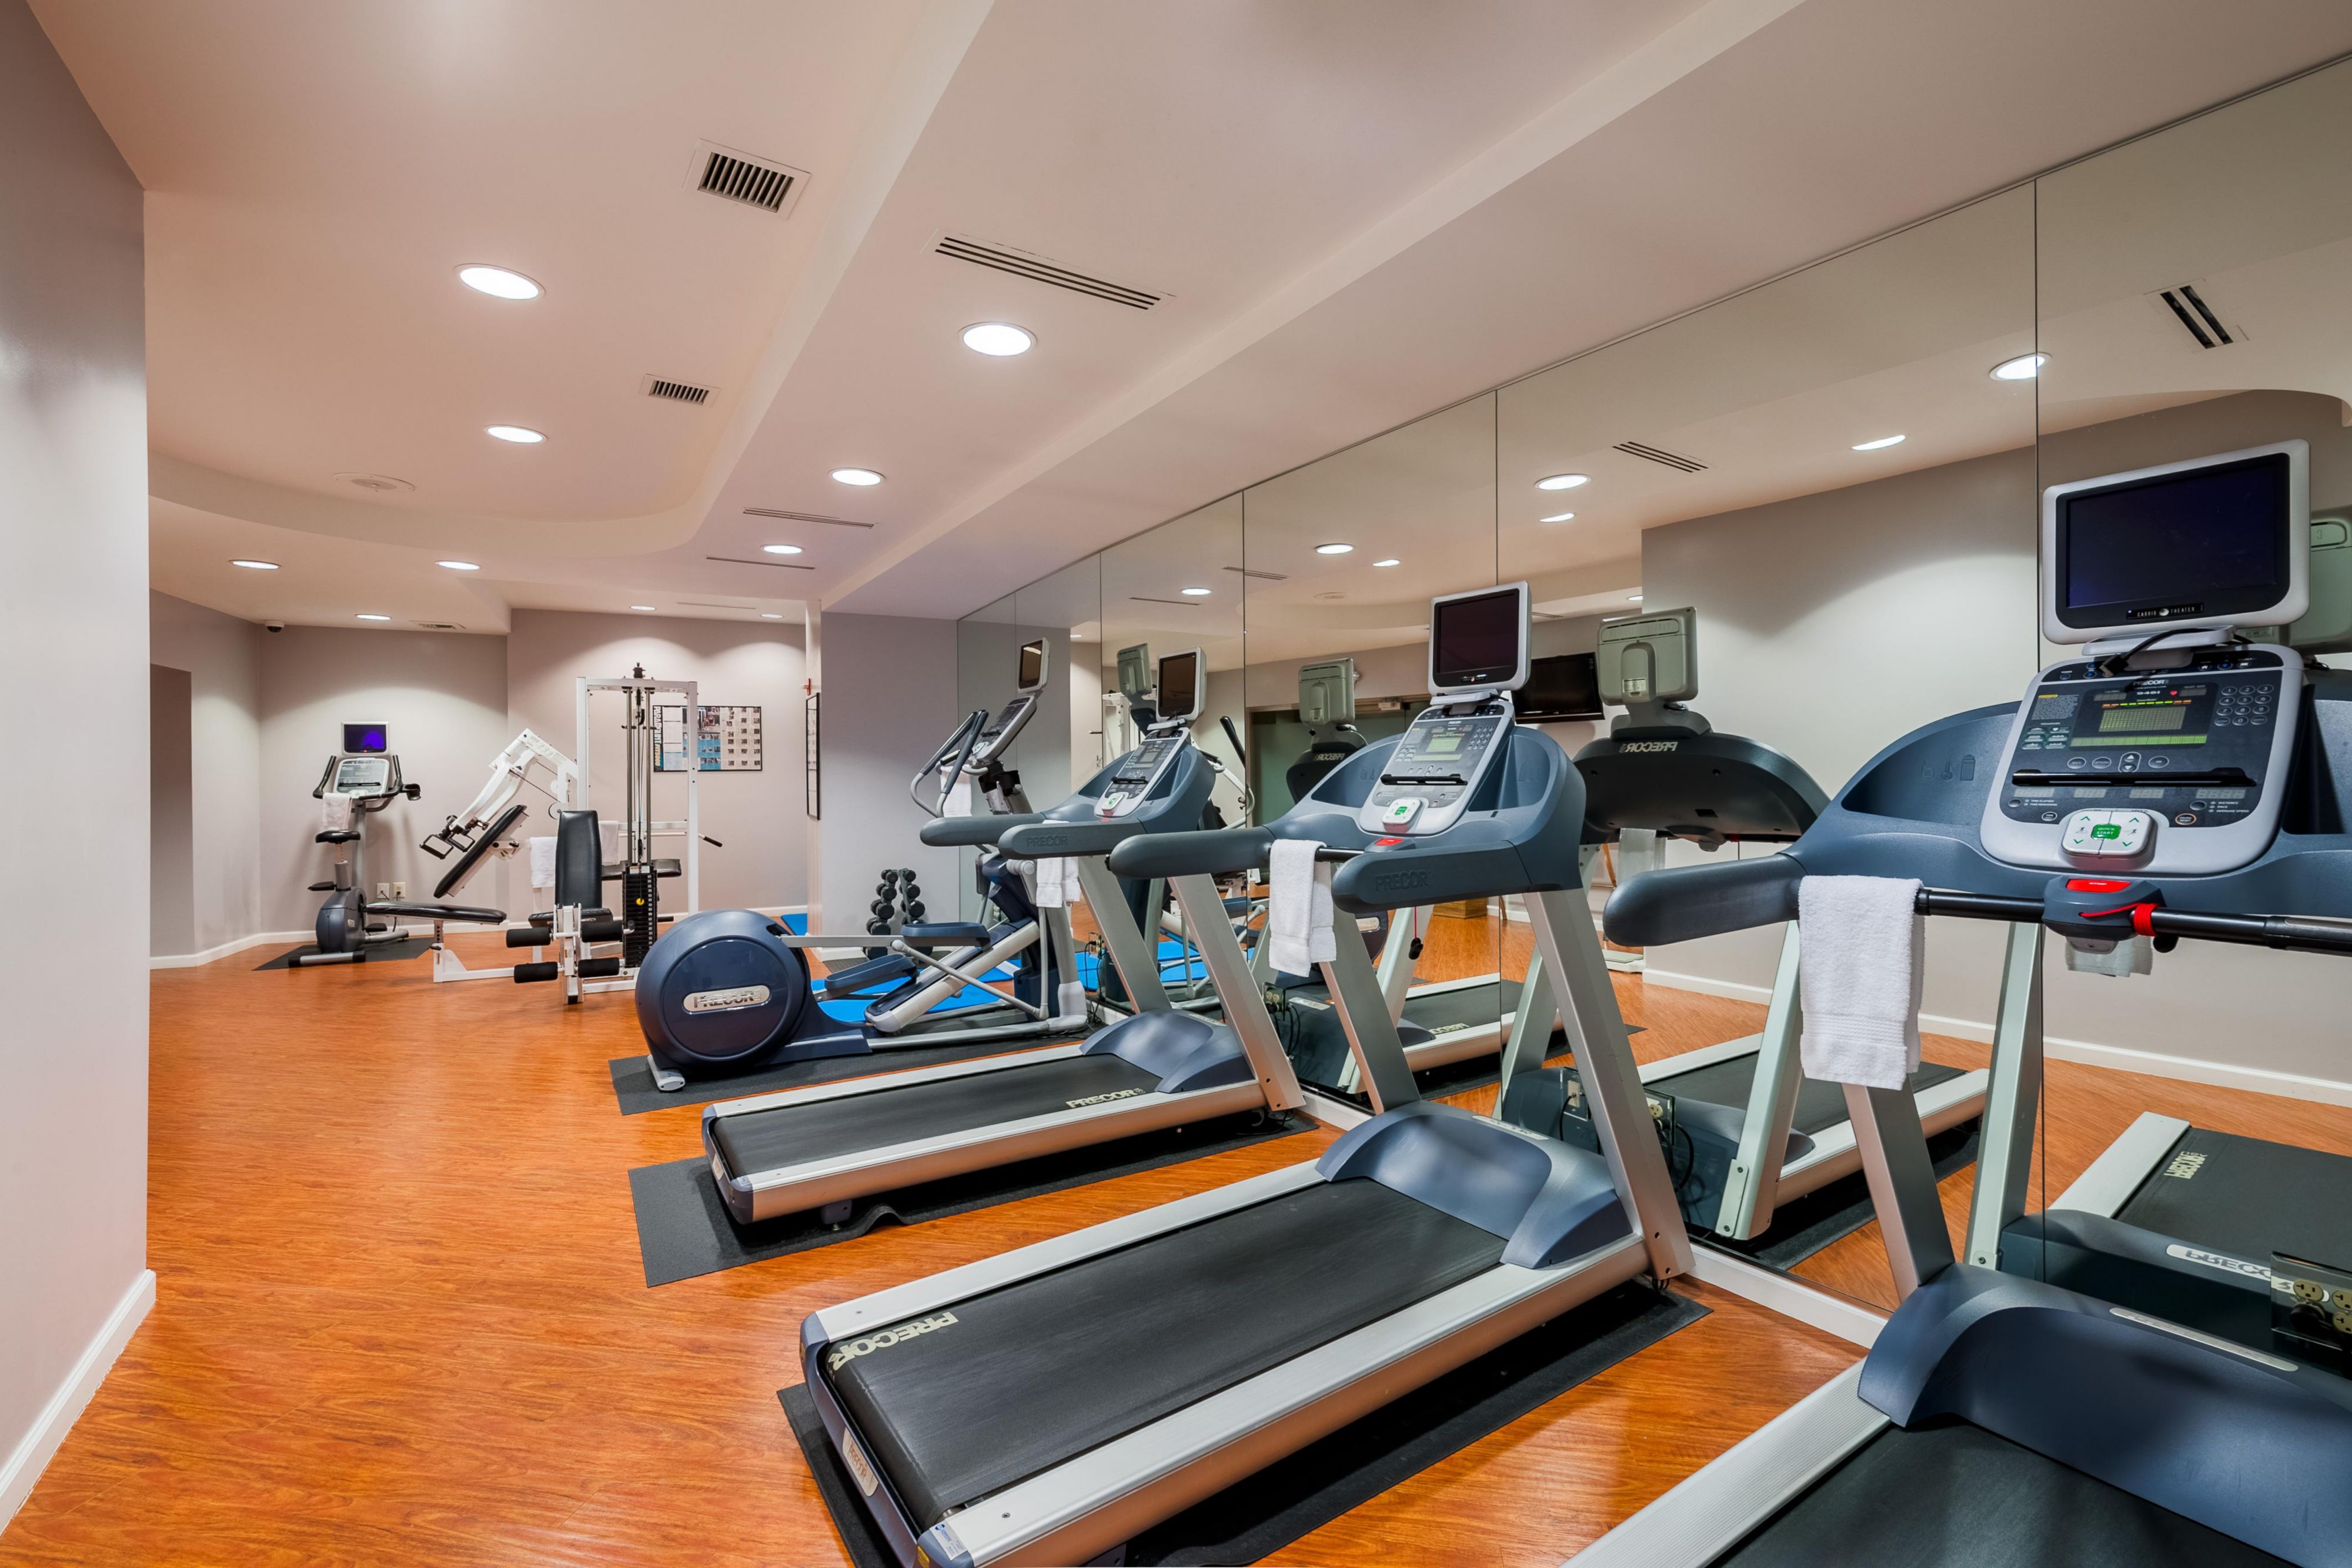 Enjoy a vigorous workout in our fully equipped fitness center